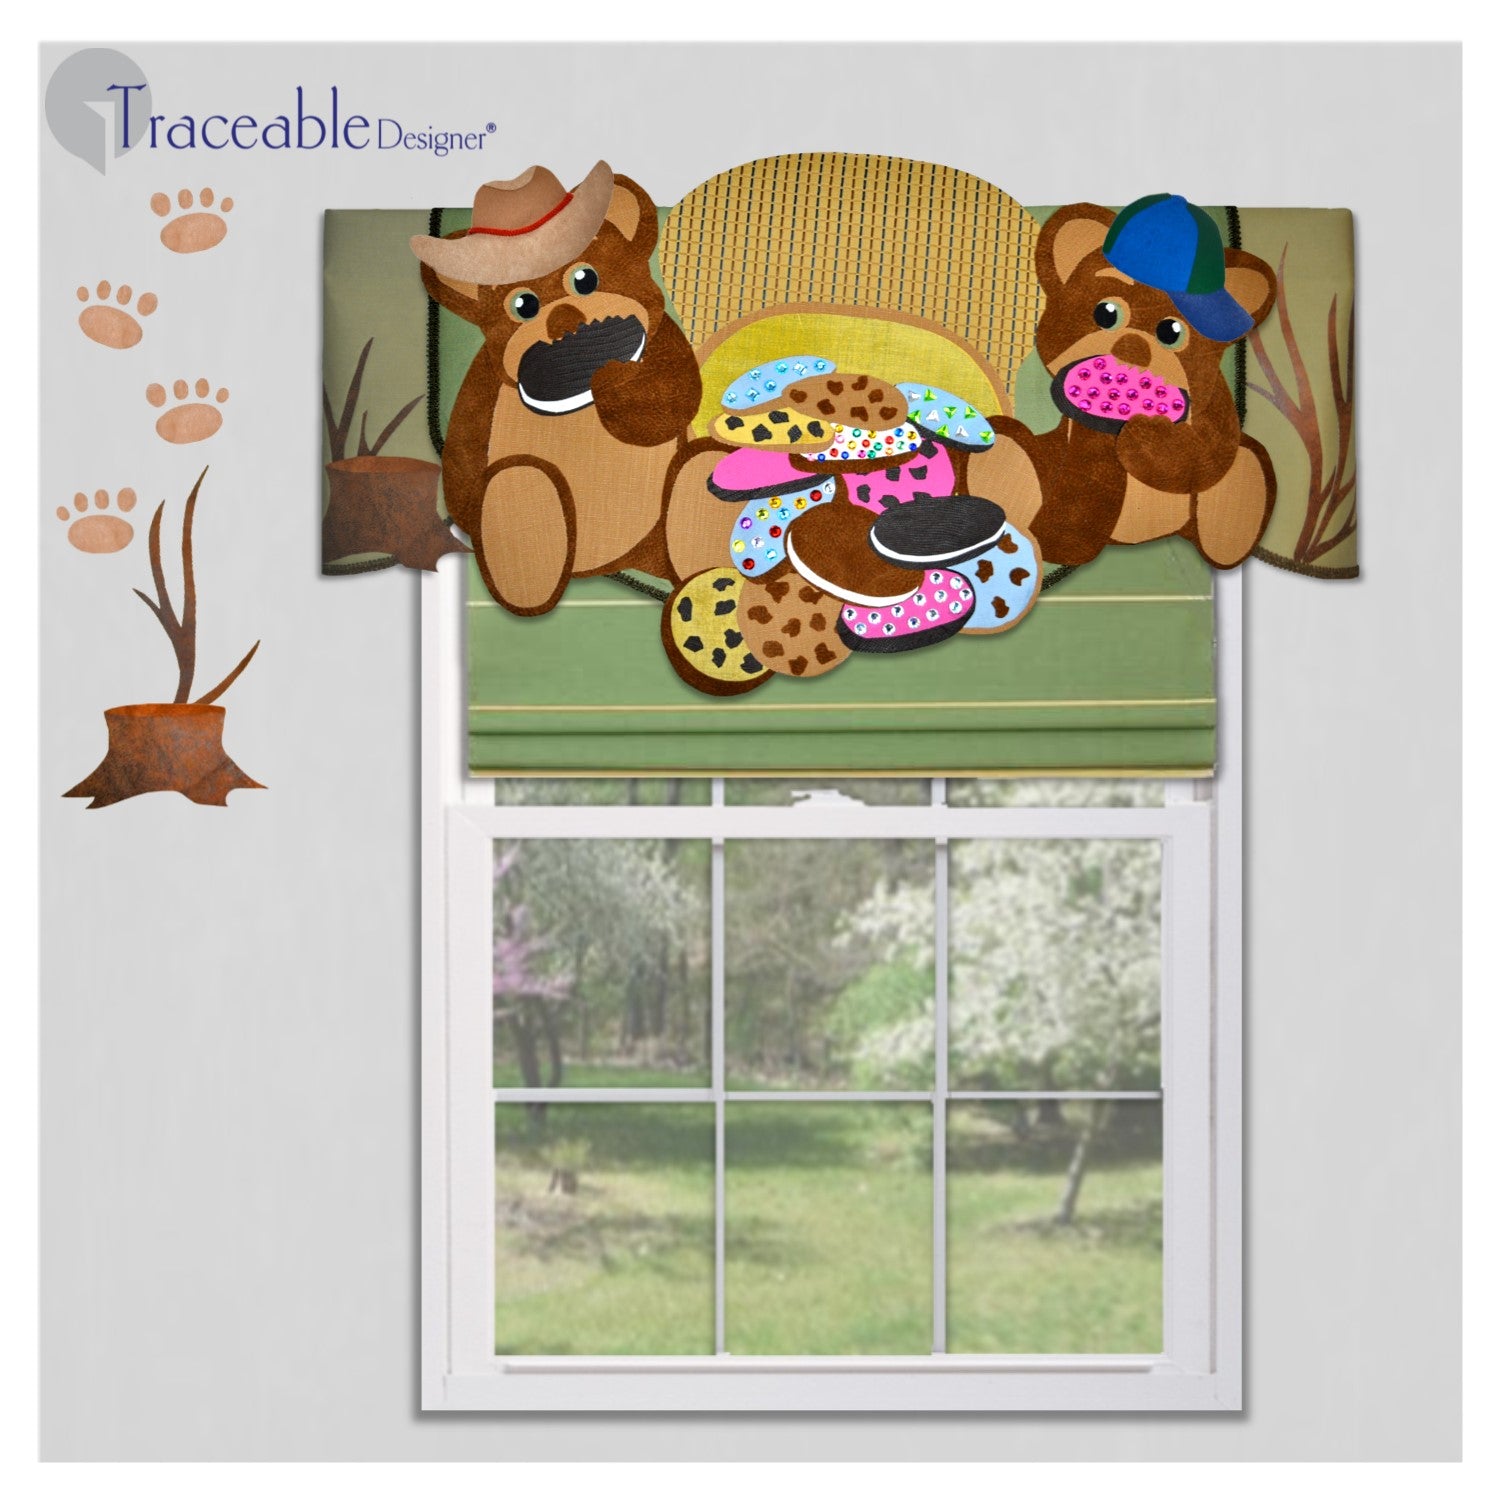 Traceable Designer children's valance, make easy no-sew teddy bear Children's teddy bear, 3D window decoration, window valance for kids bedroom or nursery, no sewing window treatments and wall accents.  Designed by Linda Schurr